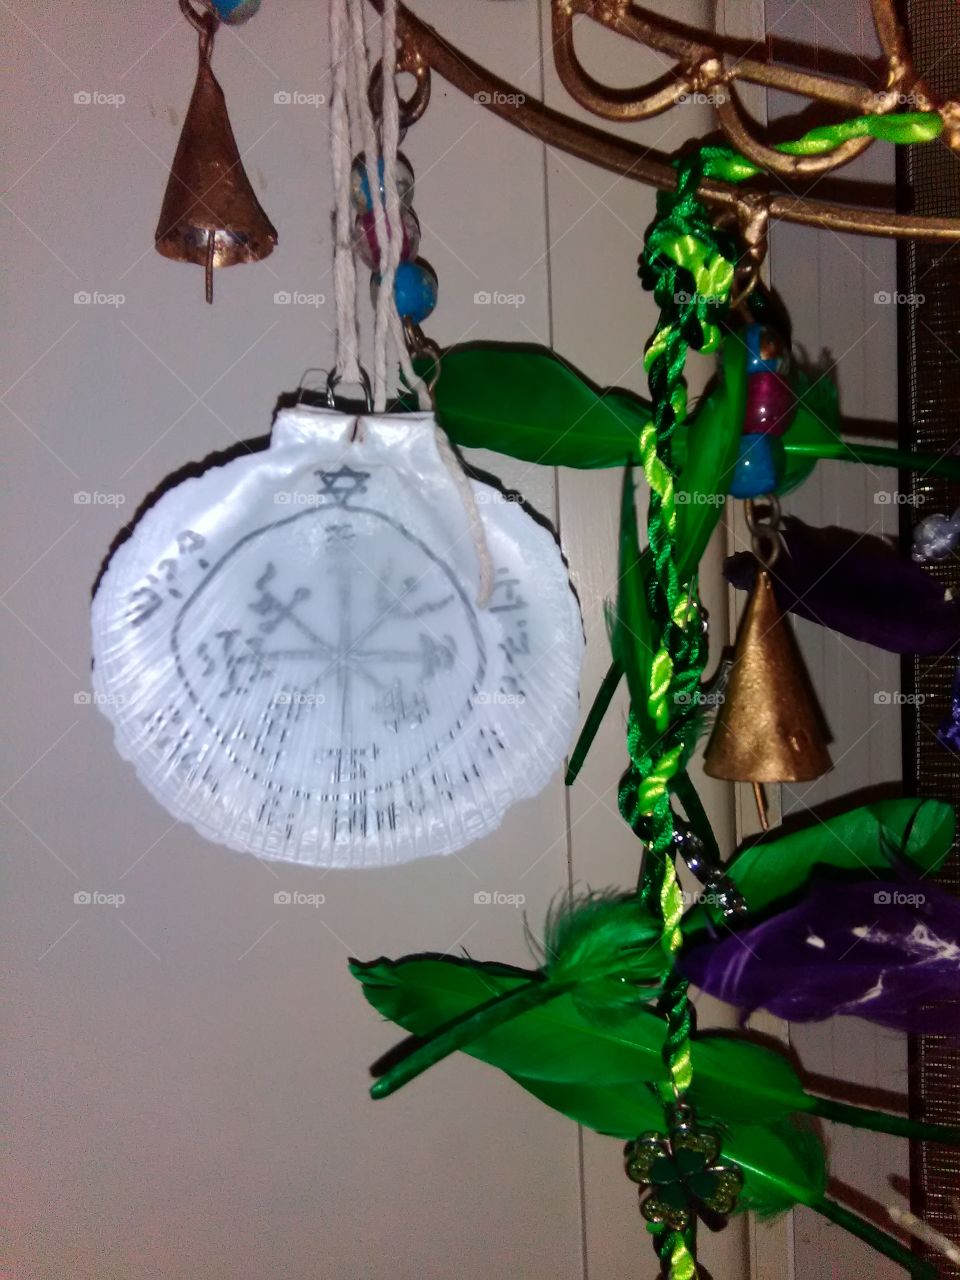 magical talisman hanging with witches ladders